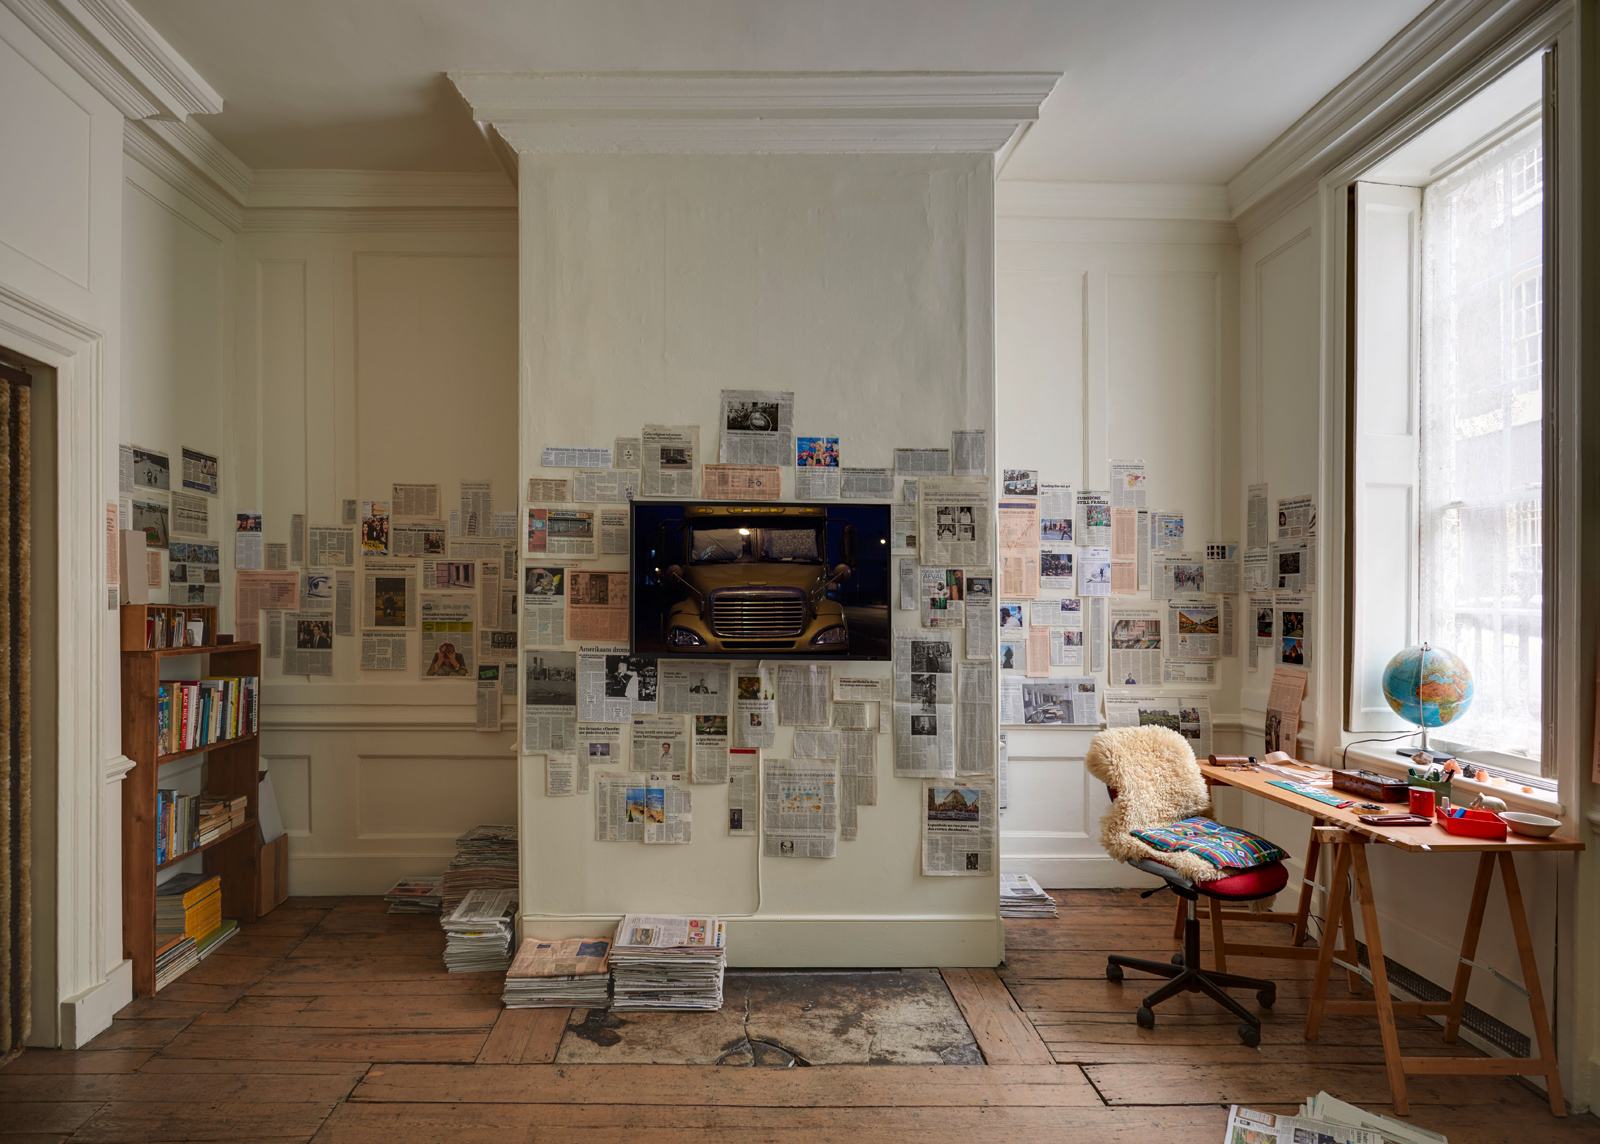 Fiona Tan, Ghost Dwellings, installation view. Courtesy the artist and Frith Street Gallery, London. Photographer: Alex Delfanne